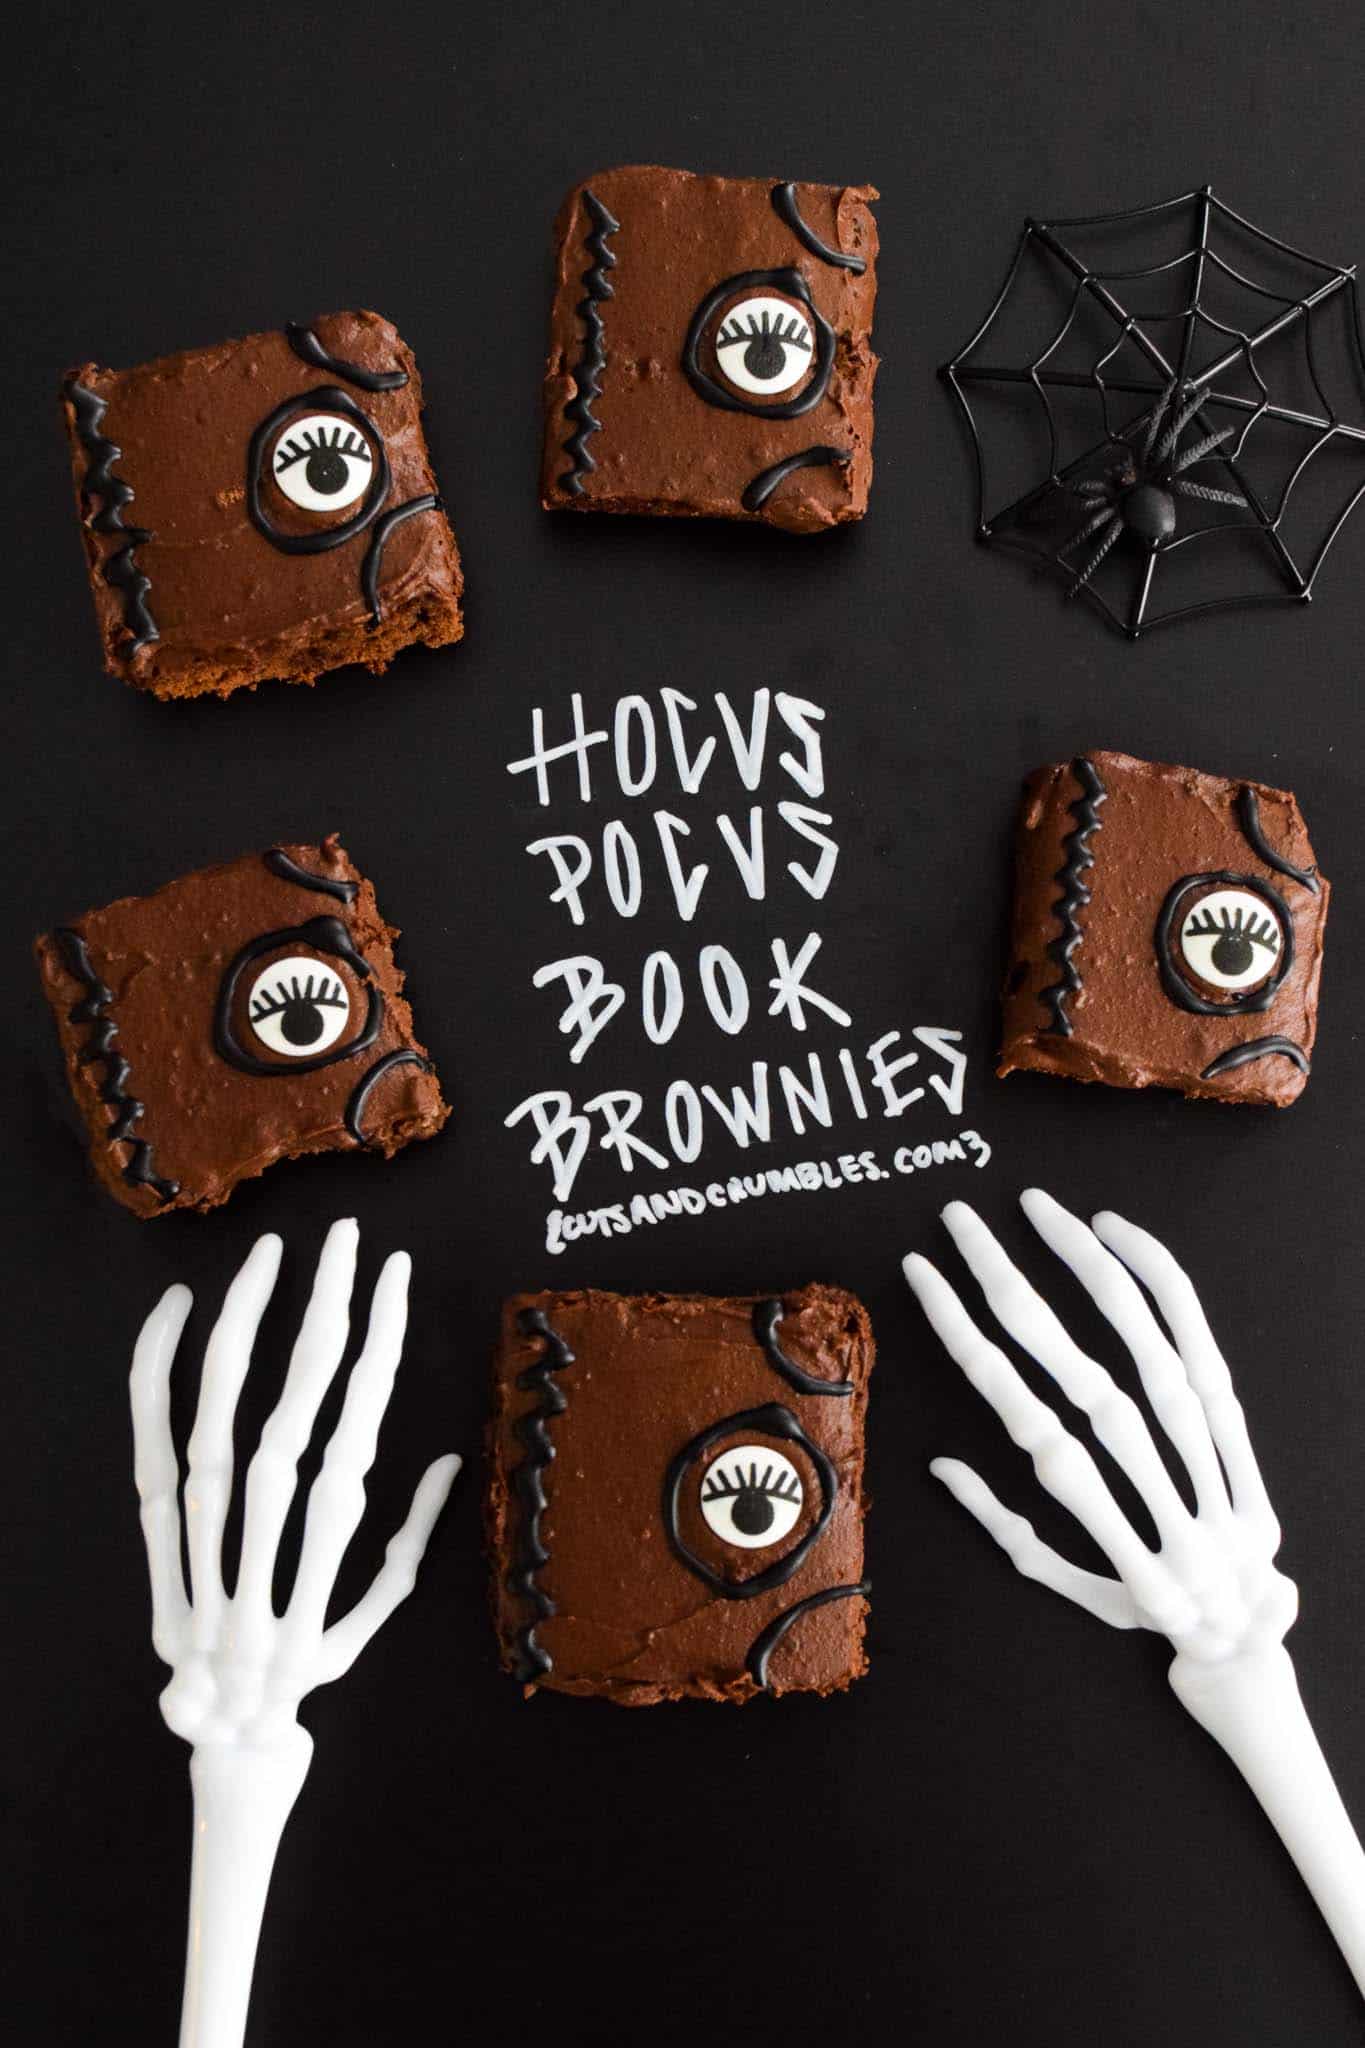 Hocus Pocus Book Brownies with title written on chalkboard and halloween skeleton hands reaching for brownies